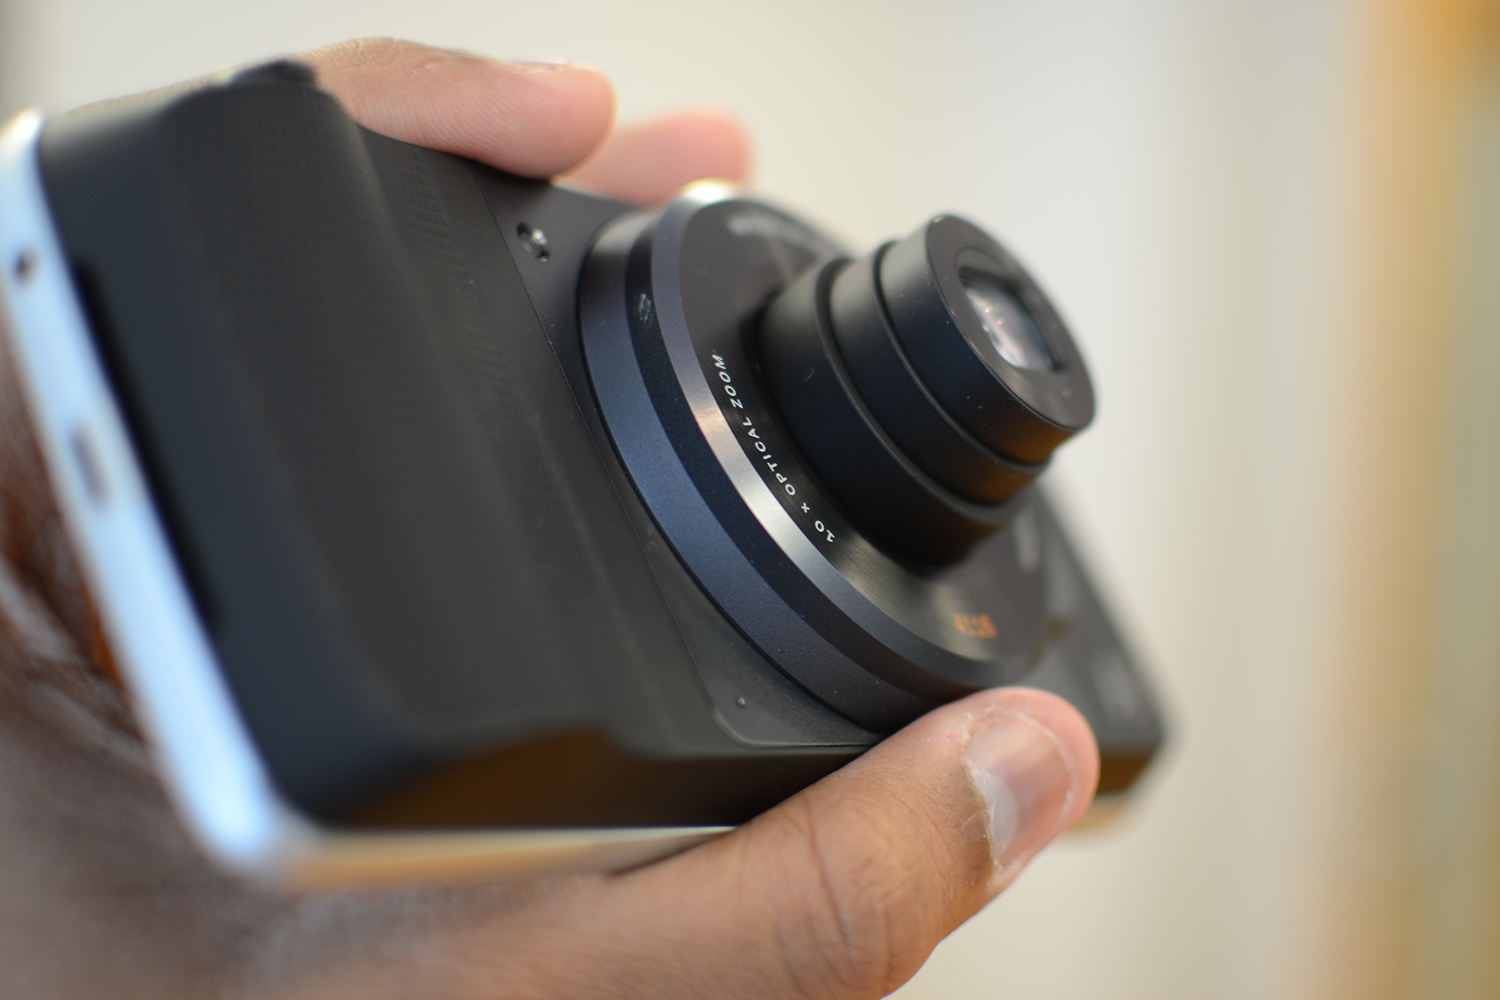 moto mod contest z play droid and hasselblad hands on 2